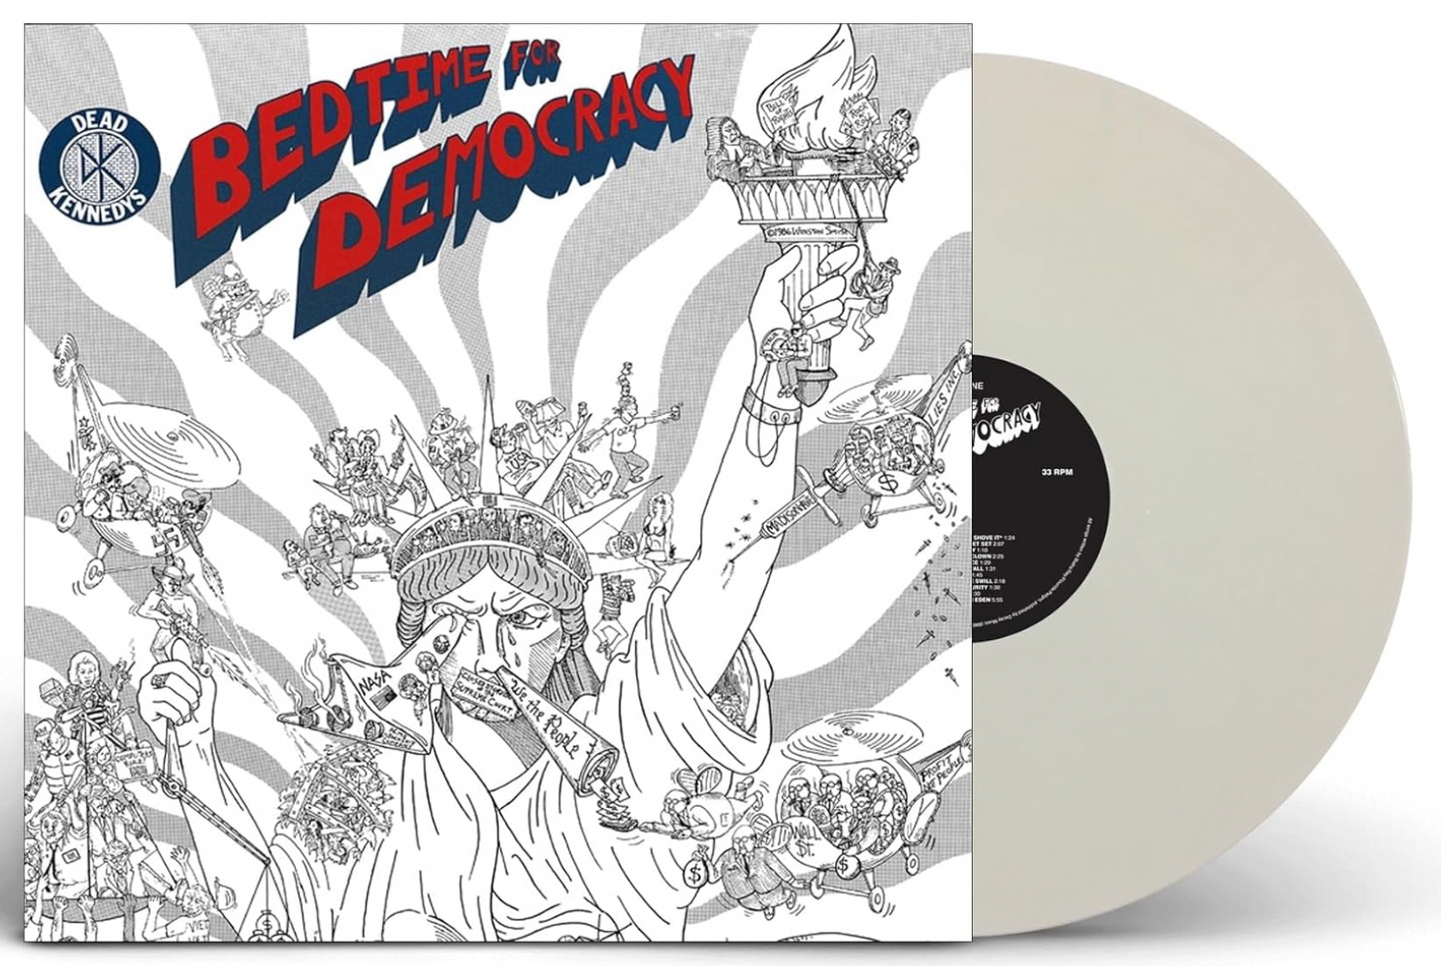 Dead Kennedys 'Bedtime For Democracy' LP